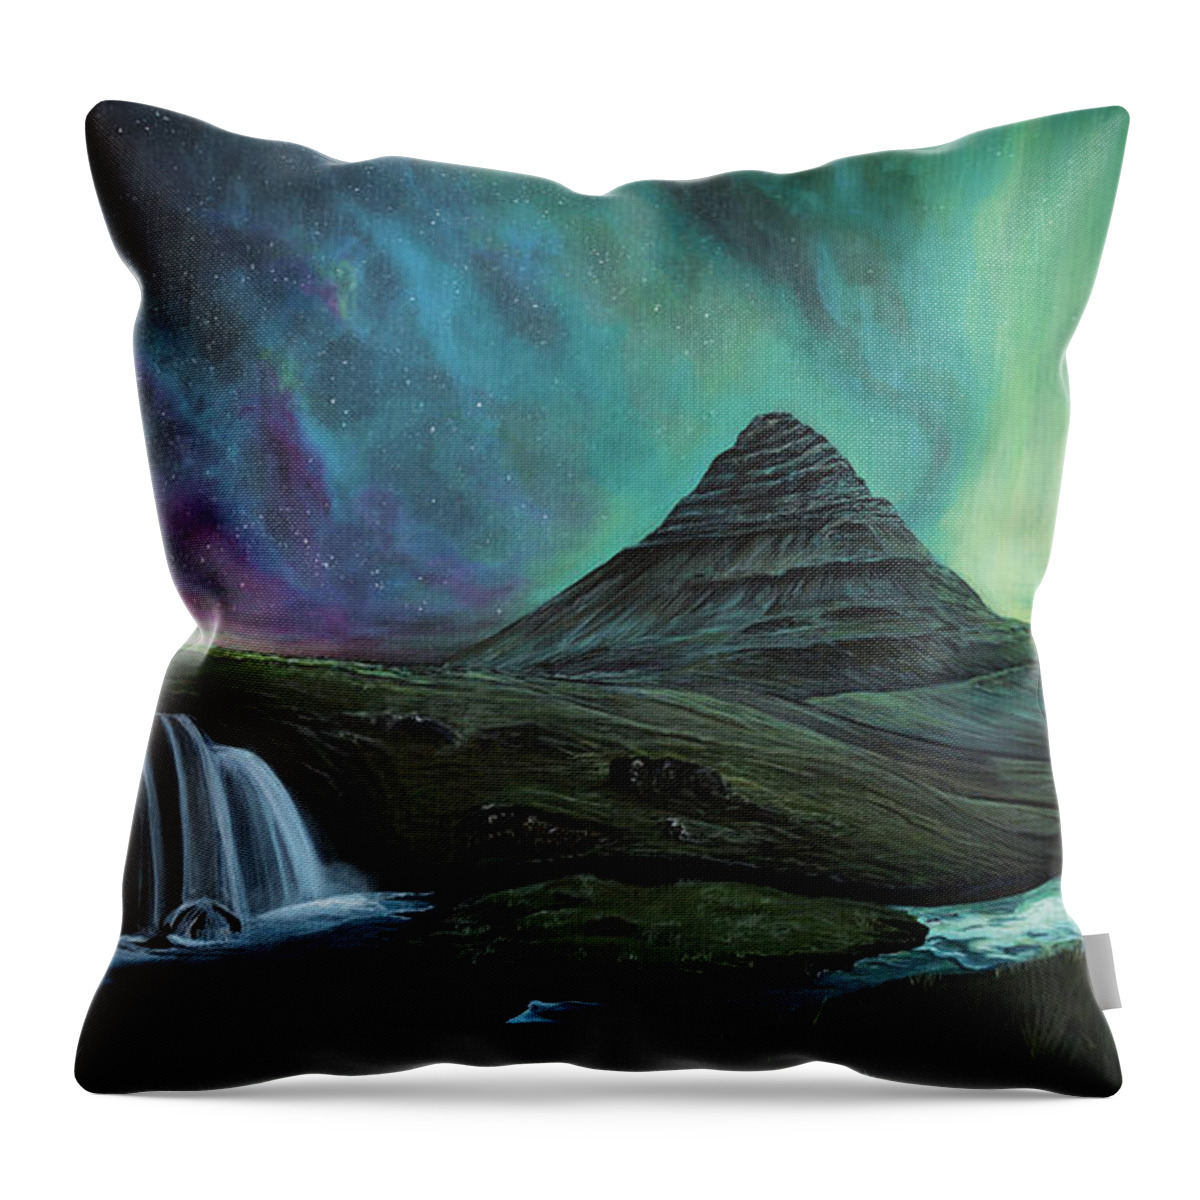 Northern Lights Throw Pillow featuring the painting The Northern Lights by Rachel Emmett